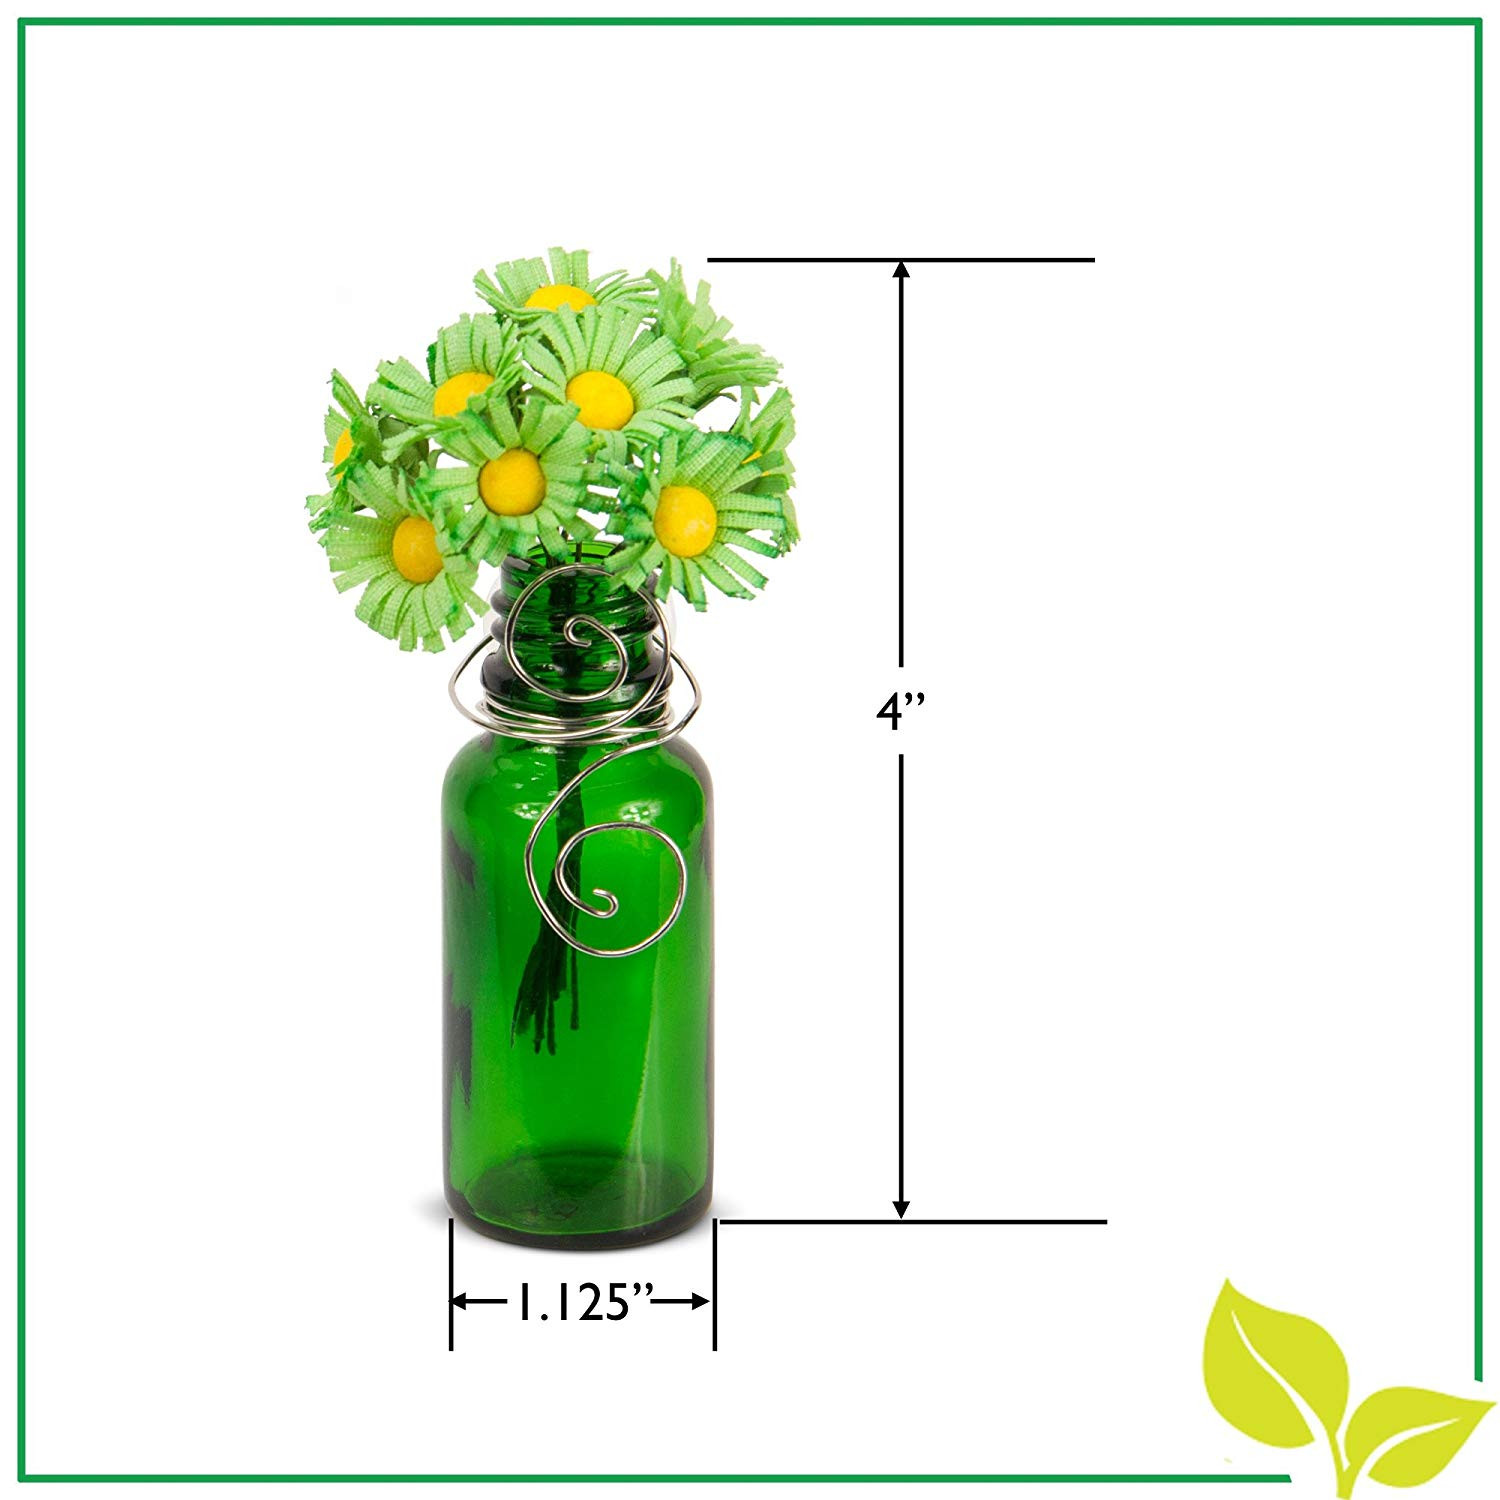 15 Lovable Suction Cup Window Vase 2024 free download suction cup window vase of amazon com vazzini mini vase bouquet suction cup bud bottle for amazon com vazzini mini vase bouquet suction cup bud bottle holder with flowers decorative for wind